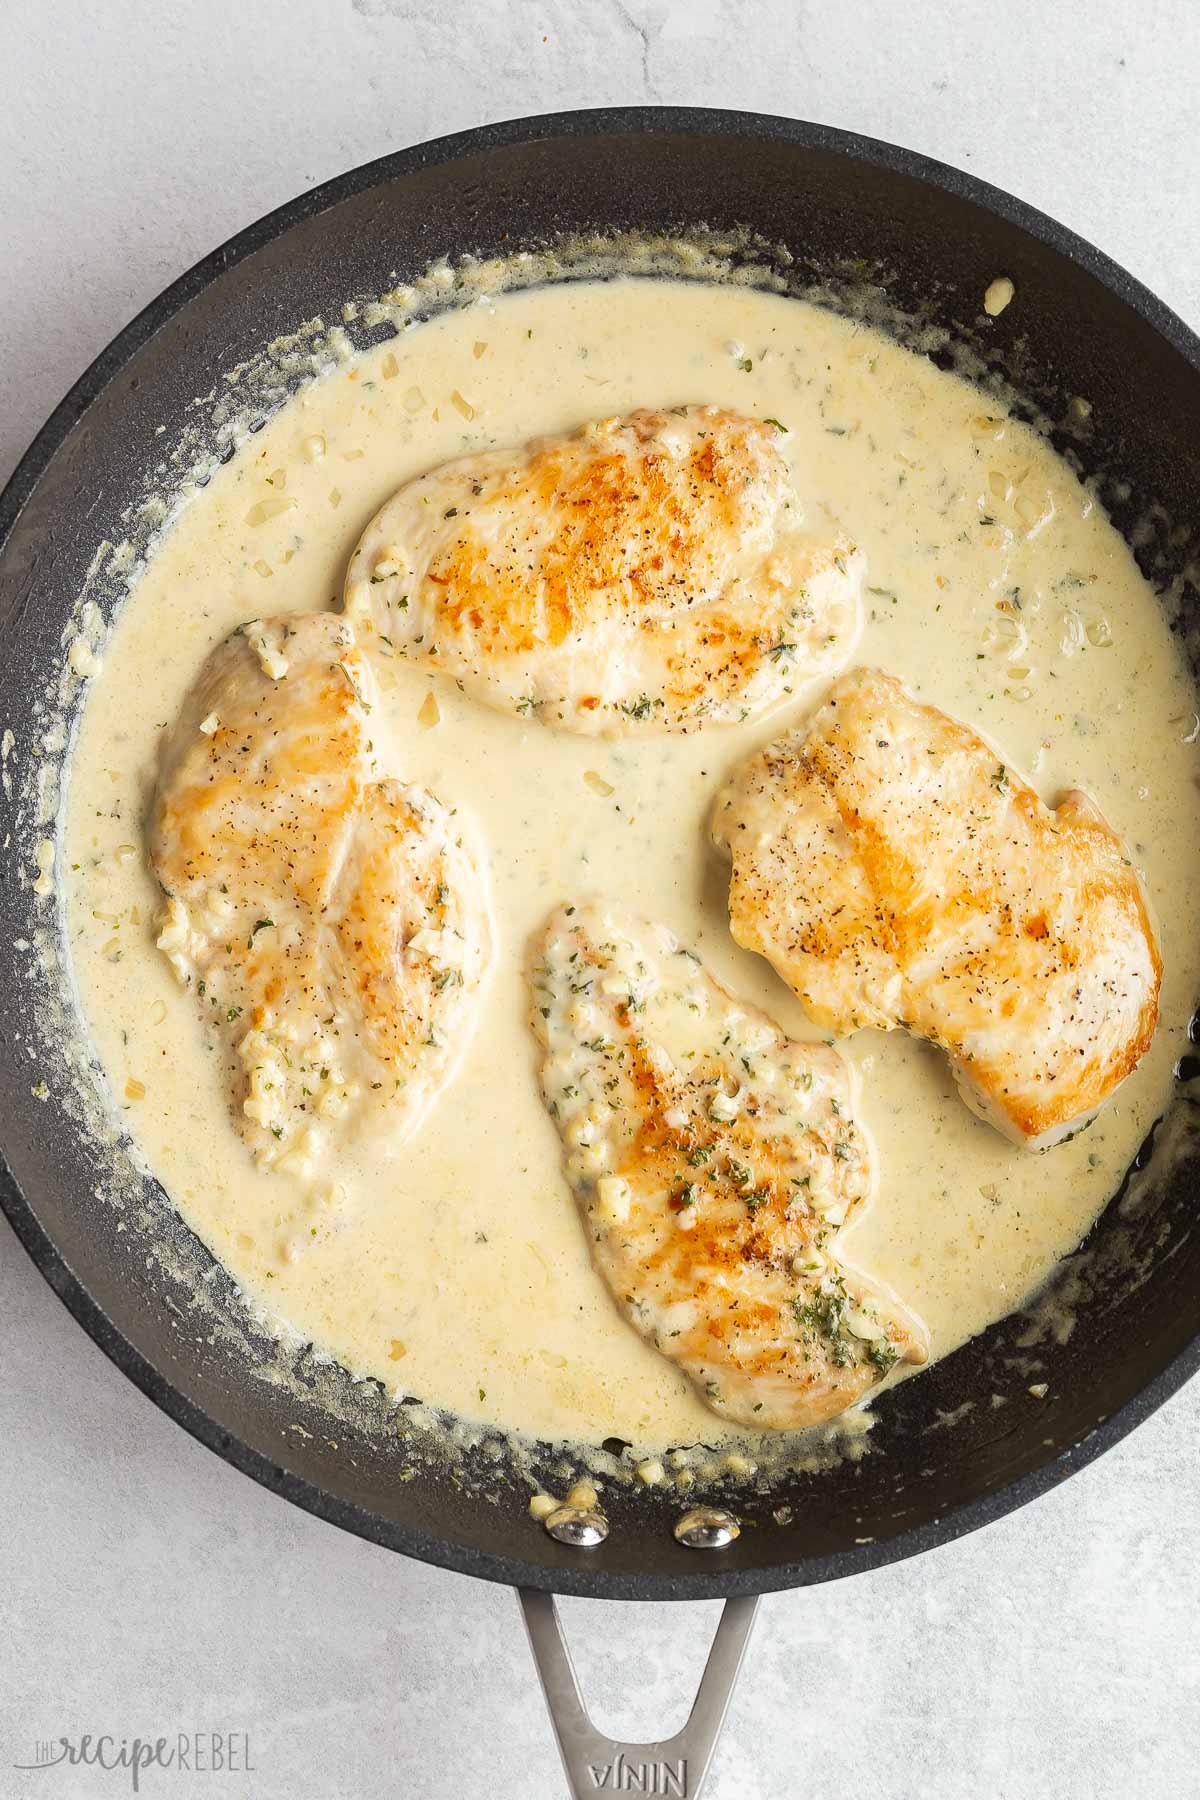 chicken with creamy sauce in skillet.